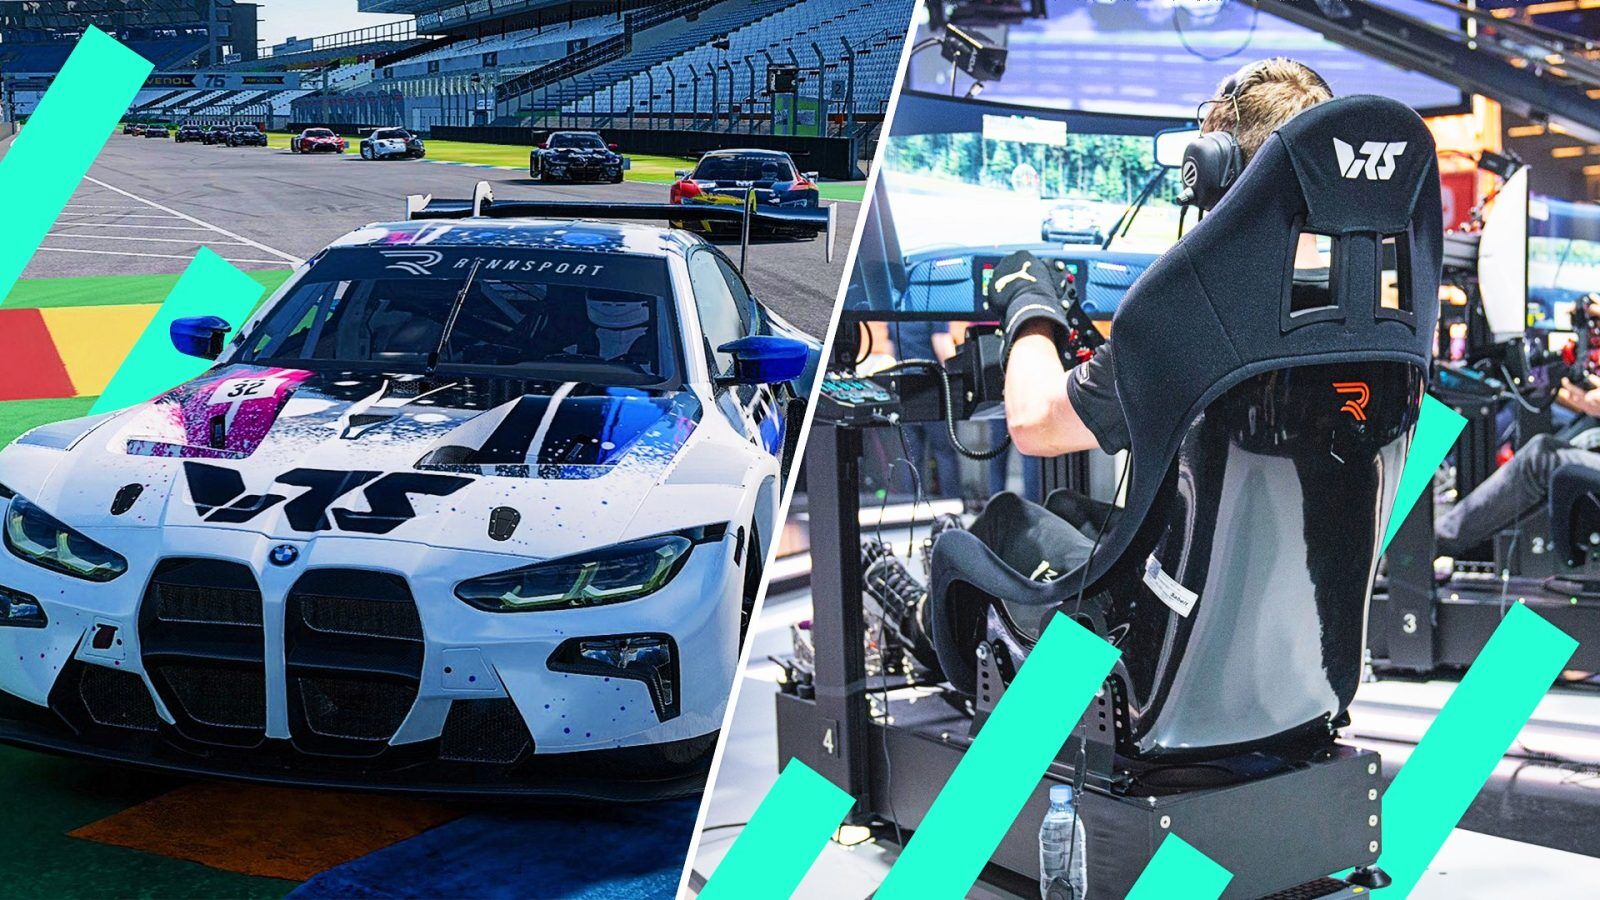 An image of a car racing in Rennsport alongside an image of an esports driver in a sim rig participating in the ESL R1 competition.